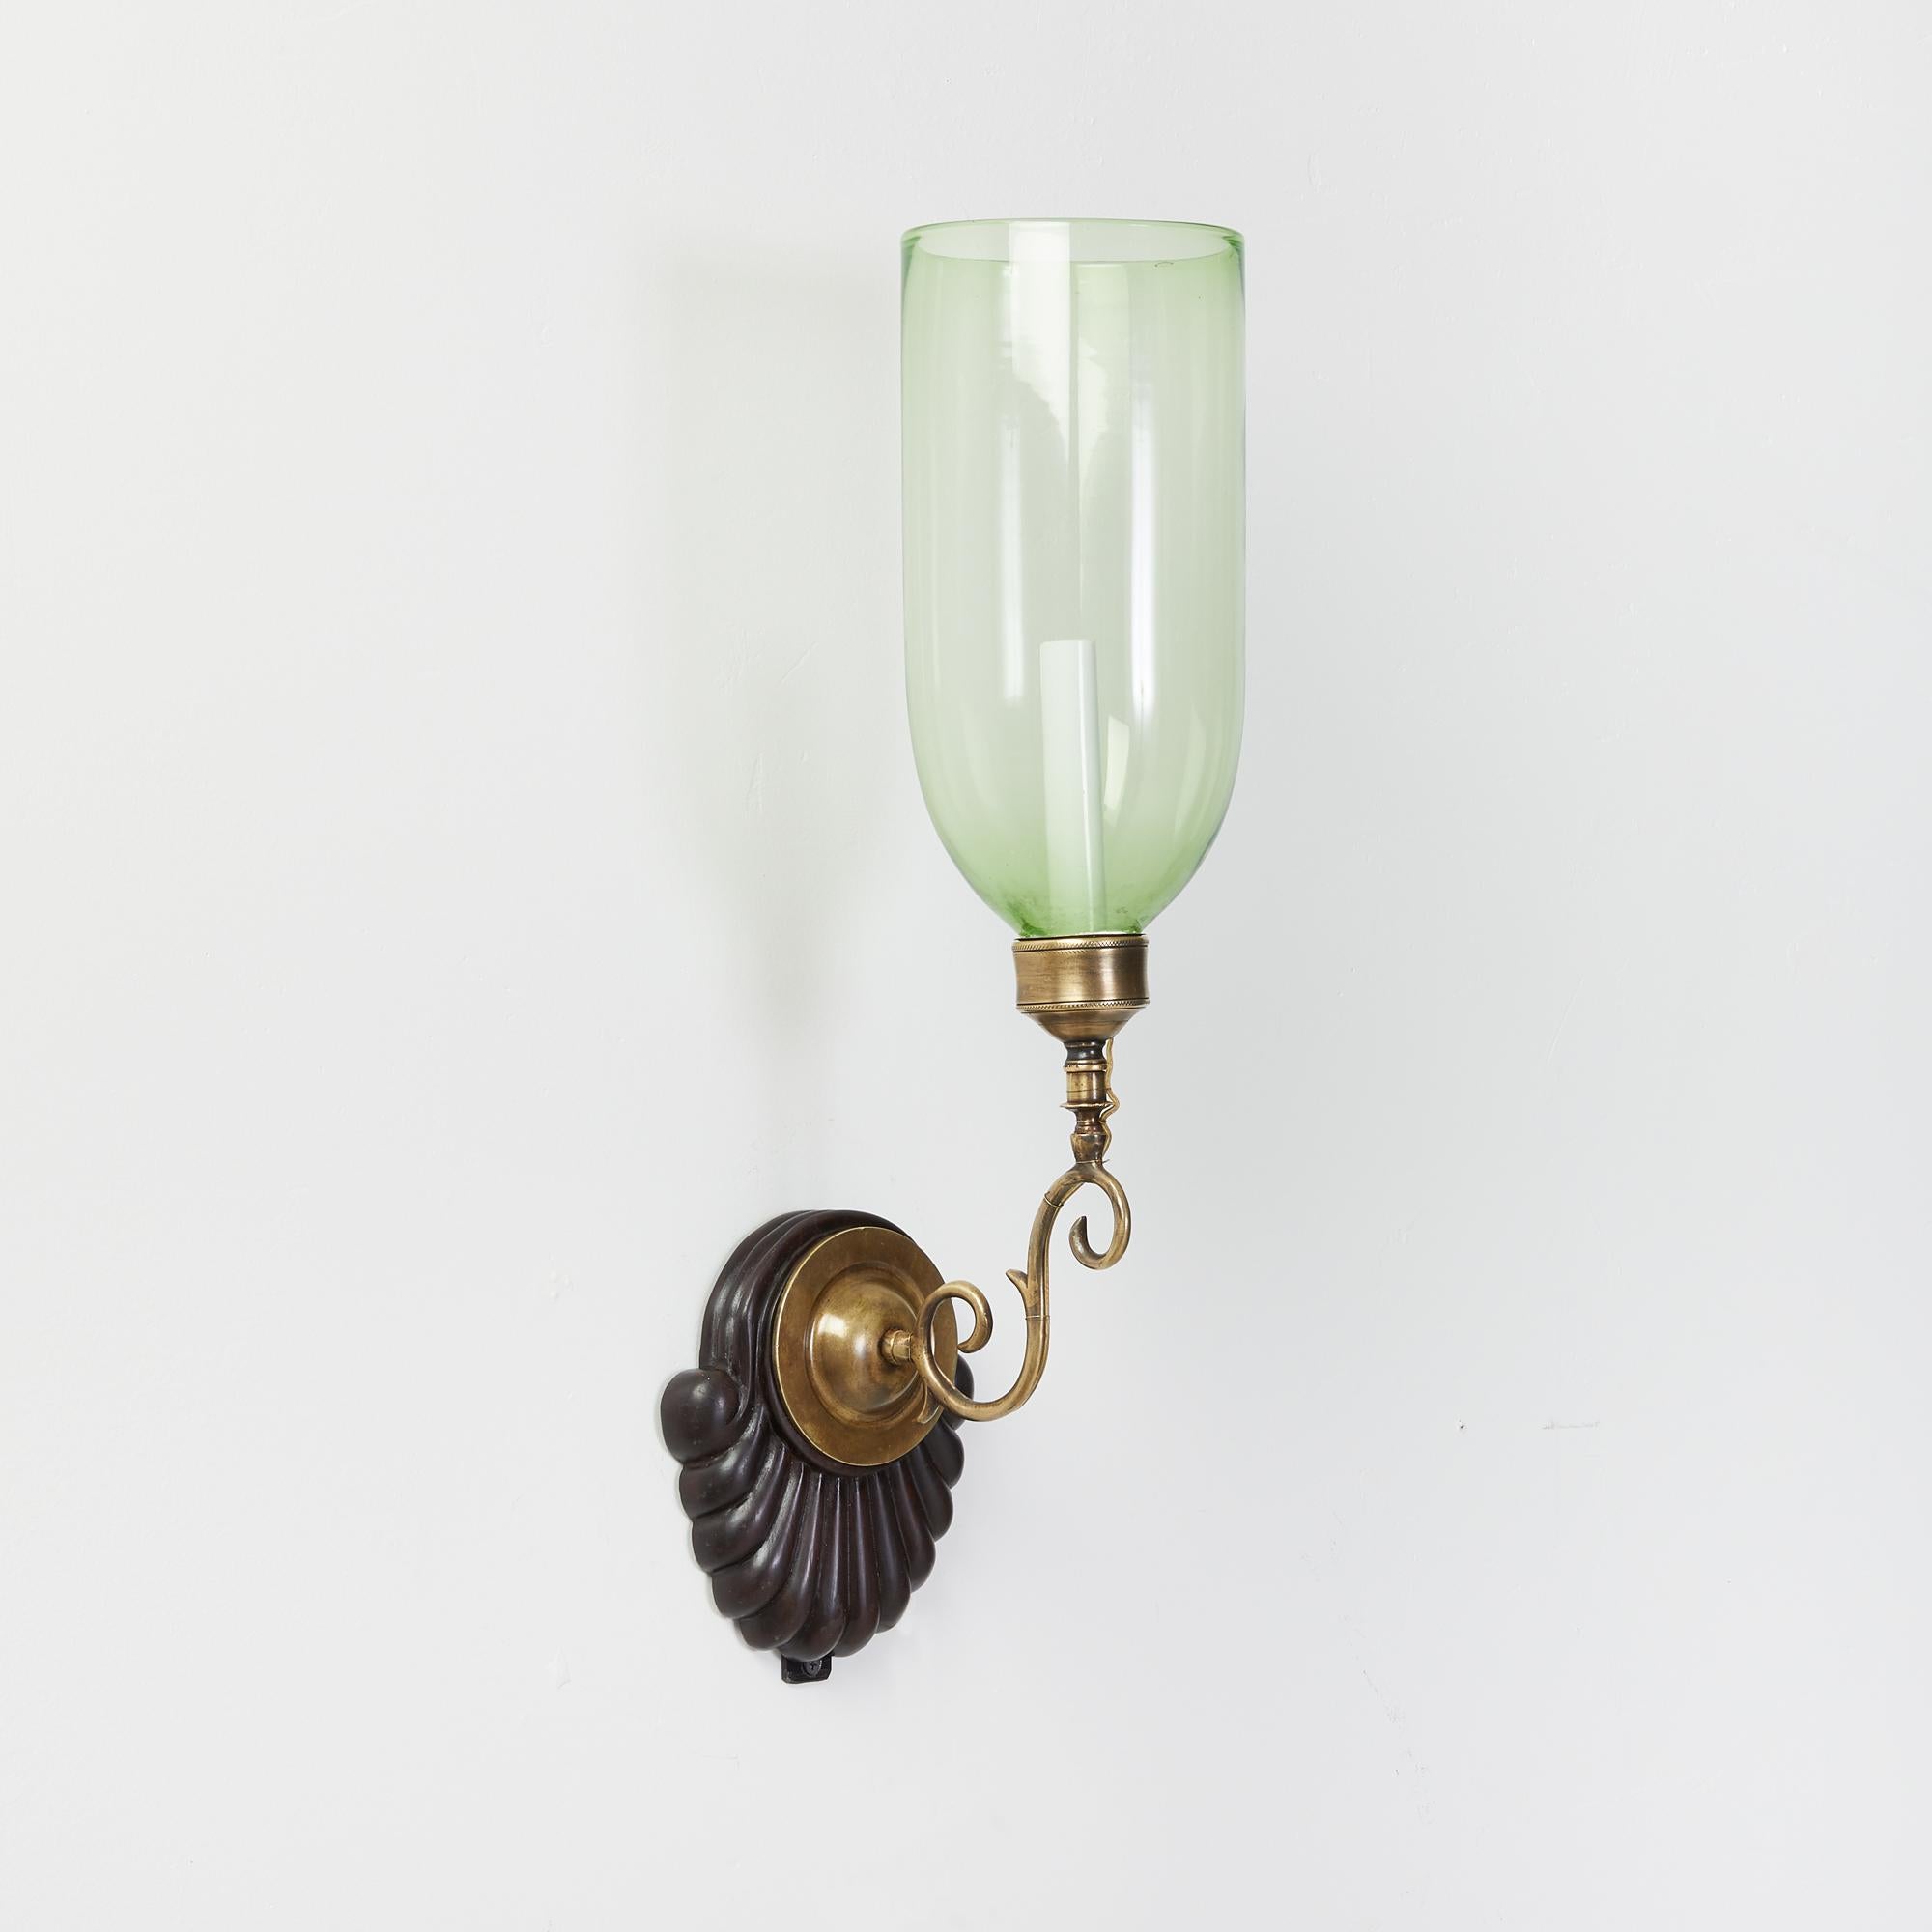 A pair of antique hand-carved shell form mahogany Anglo Indian backplates with patinated brass sconce fittings and light green glass hurricane shades. Electrified with one candelabra base socket per sconce.

Our custom hurricane sconces are